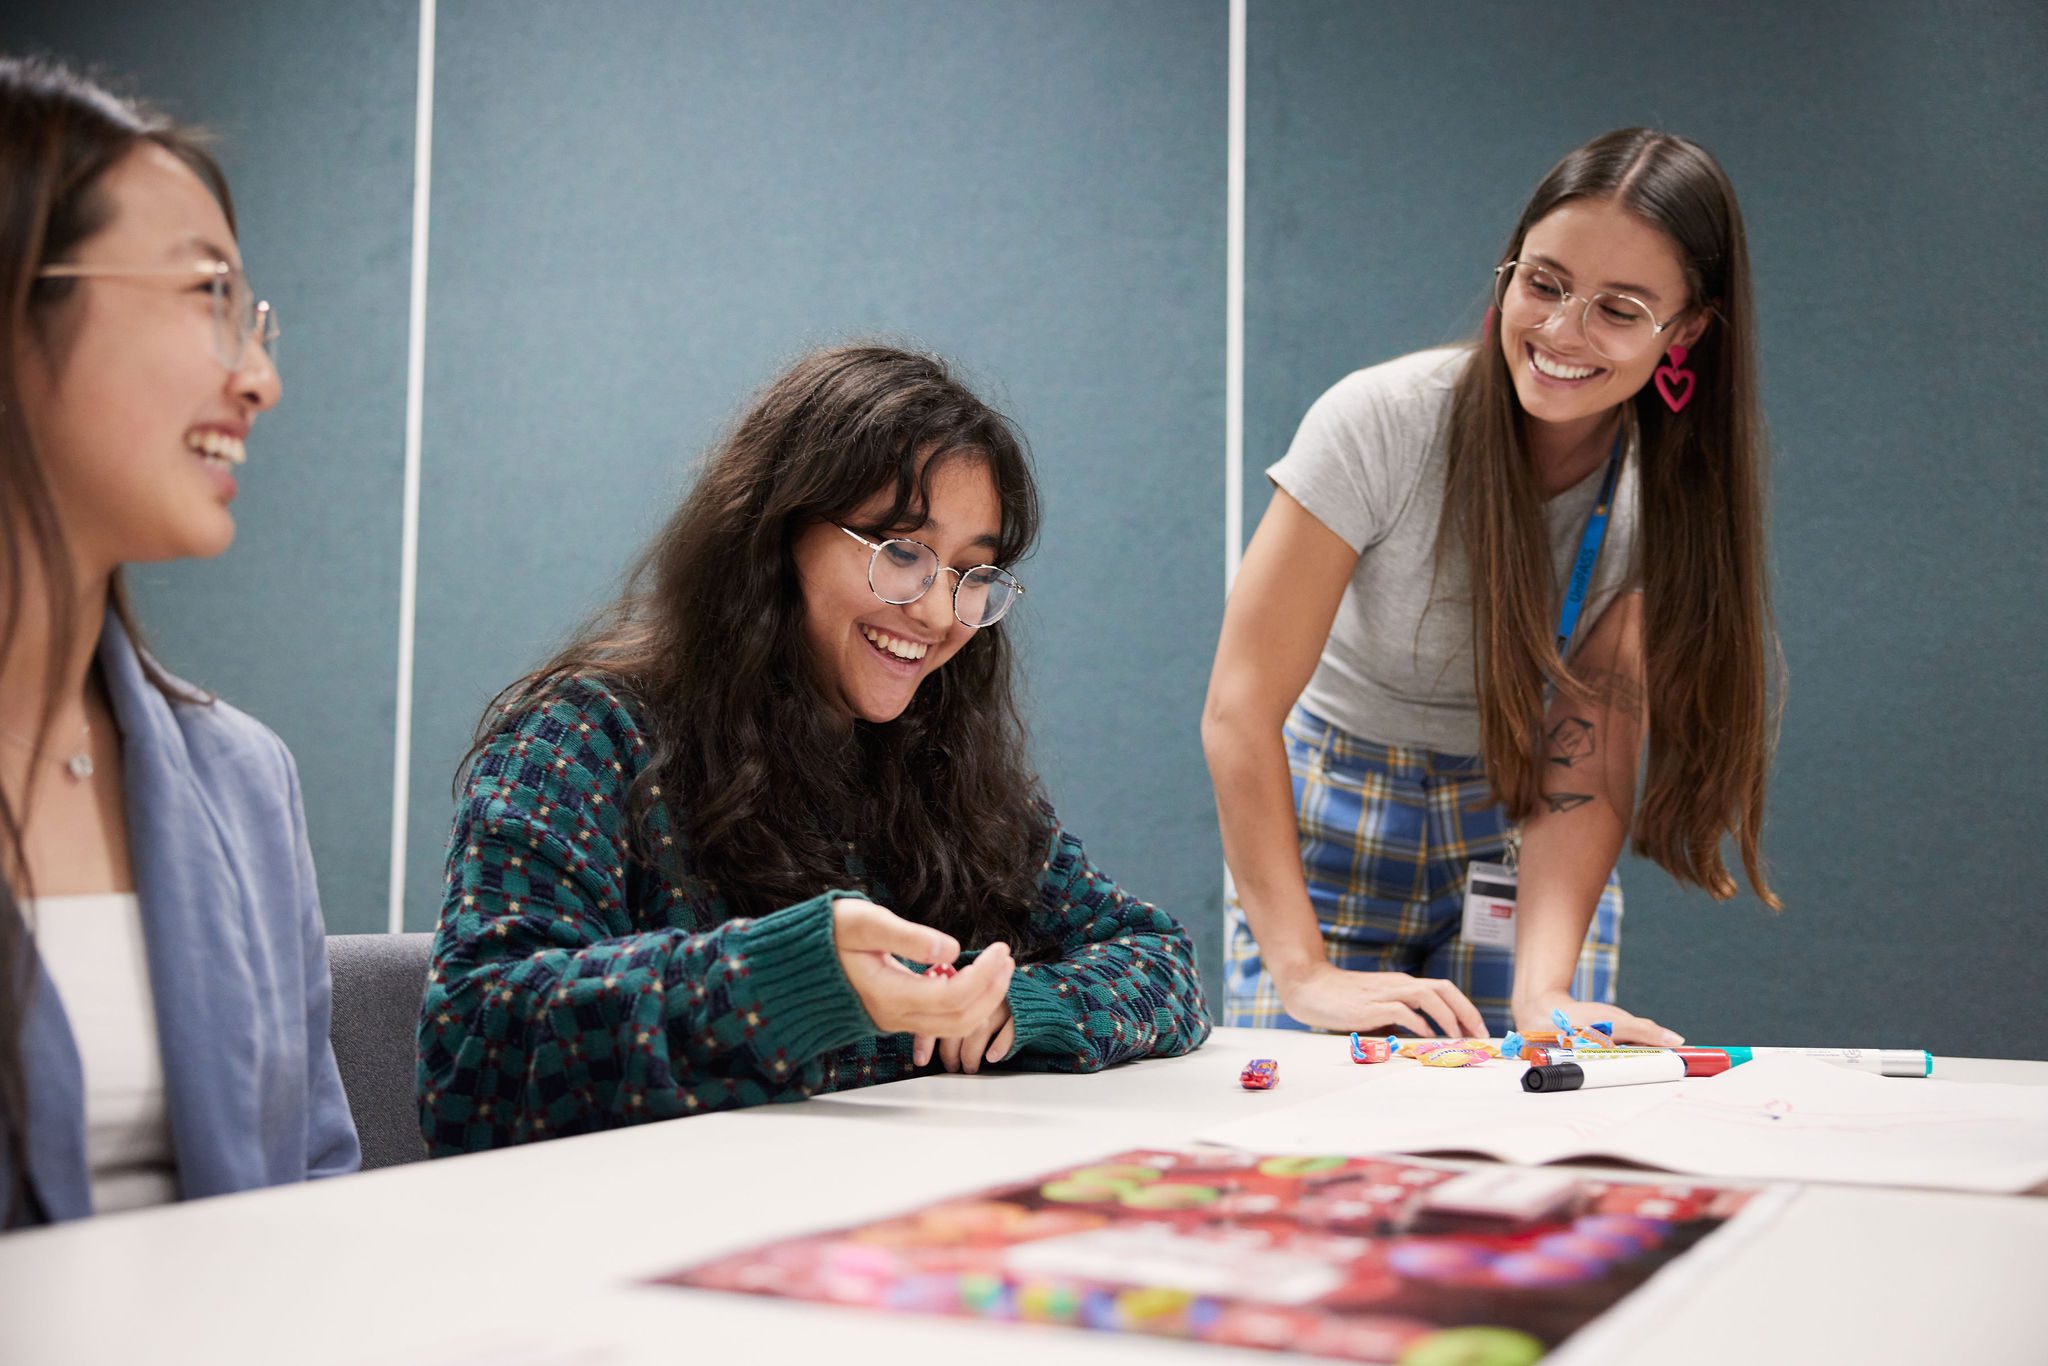 Students playing a game at a UniPASS session, with a Peer Learning Facilitator assisting.